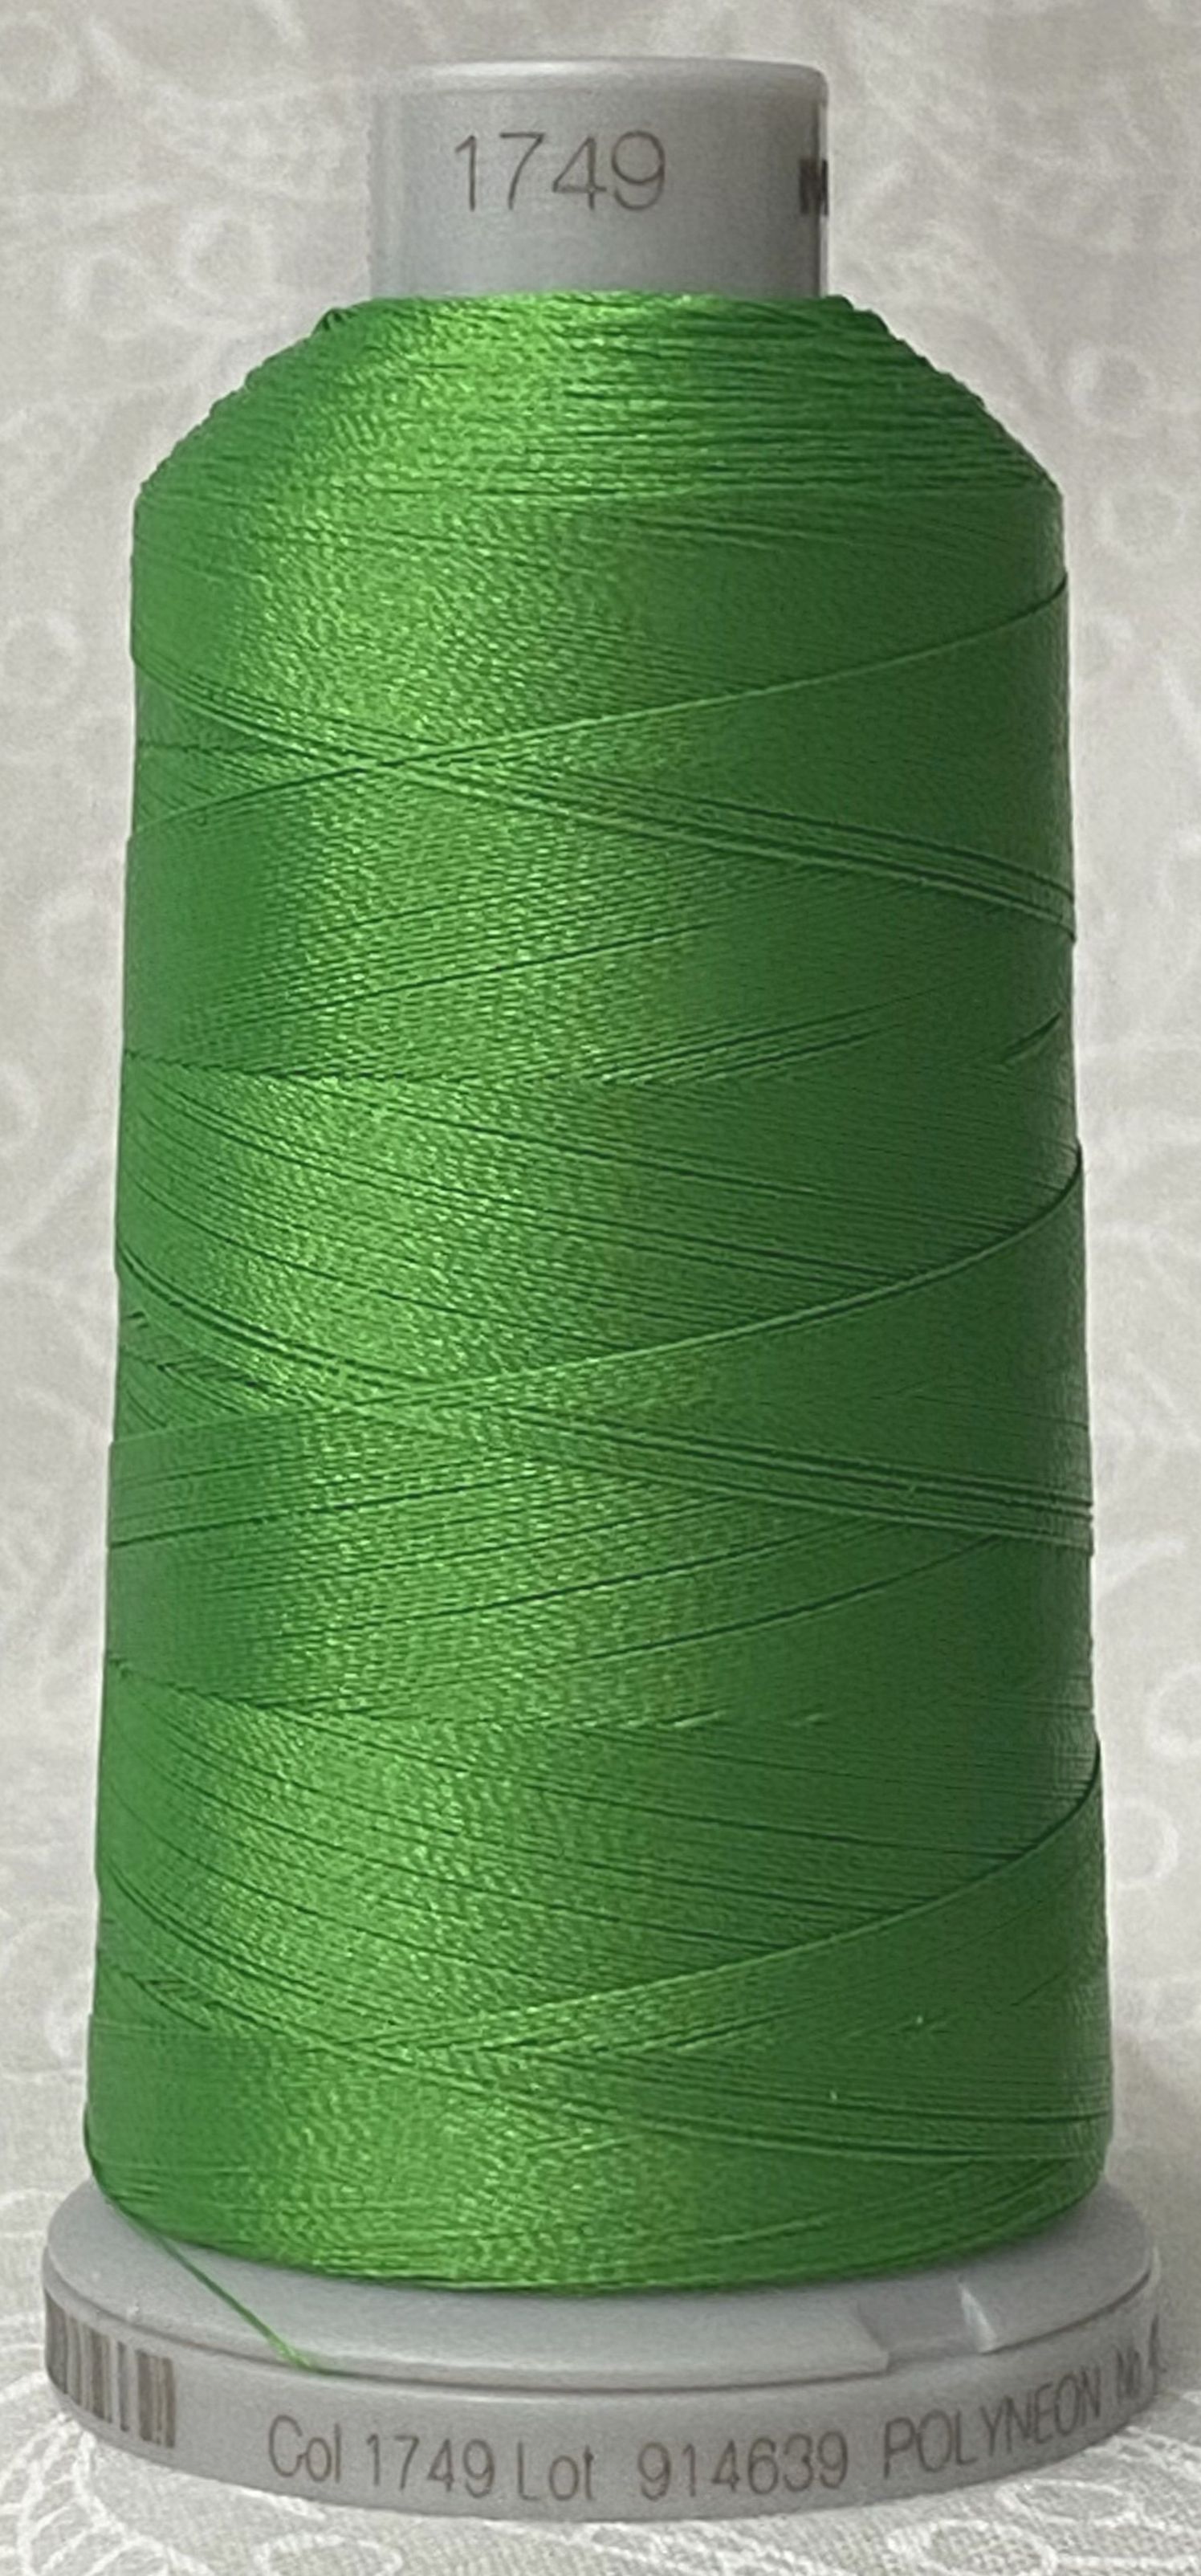 Madeira Polyneon Embroidery Thread 40 Wt 5000M M Cone Color # 1898 